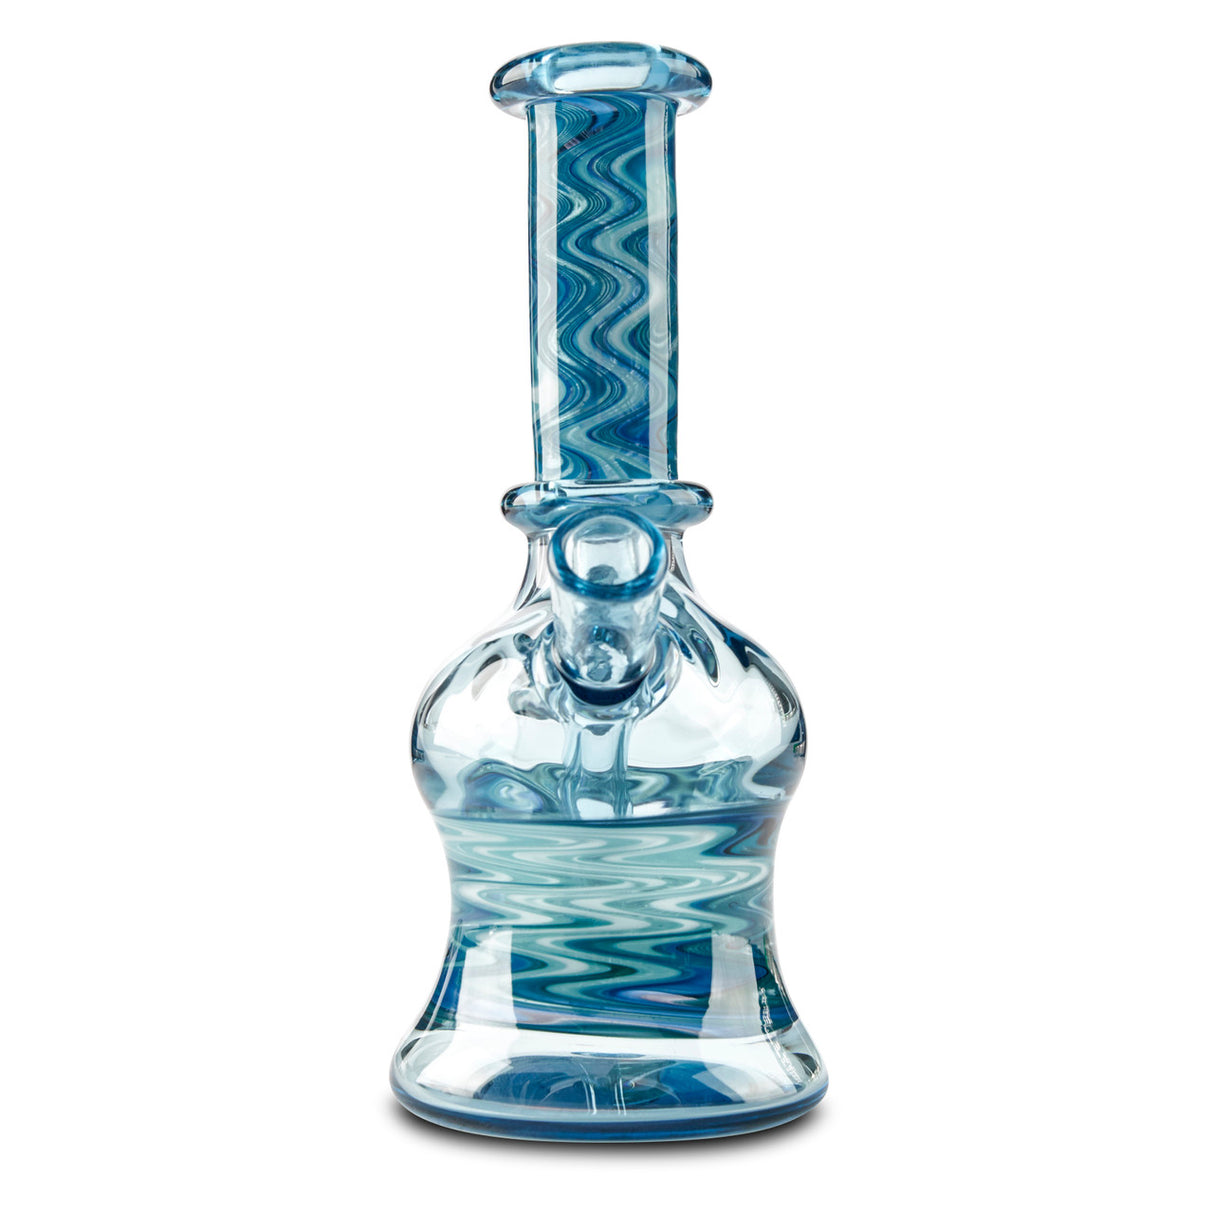 blueberry glass mini tube raindrop rig for dabbing dabs